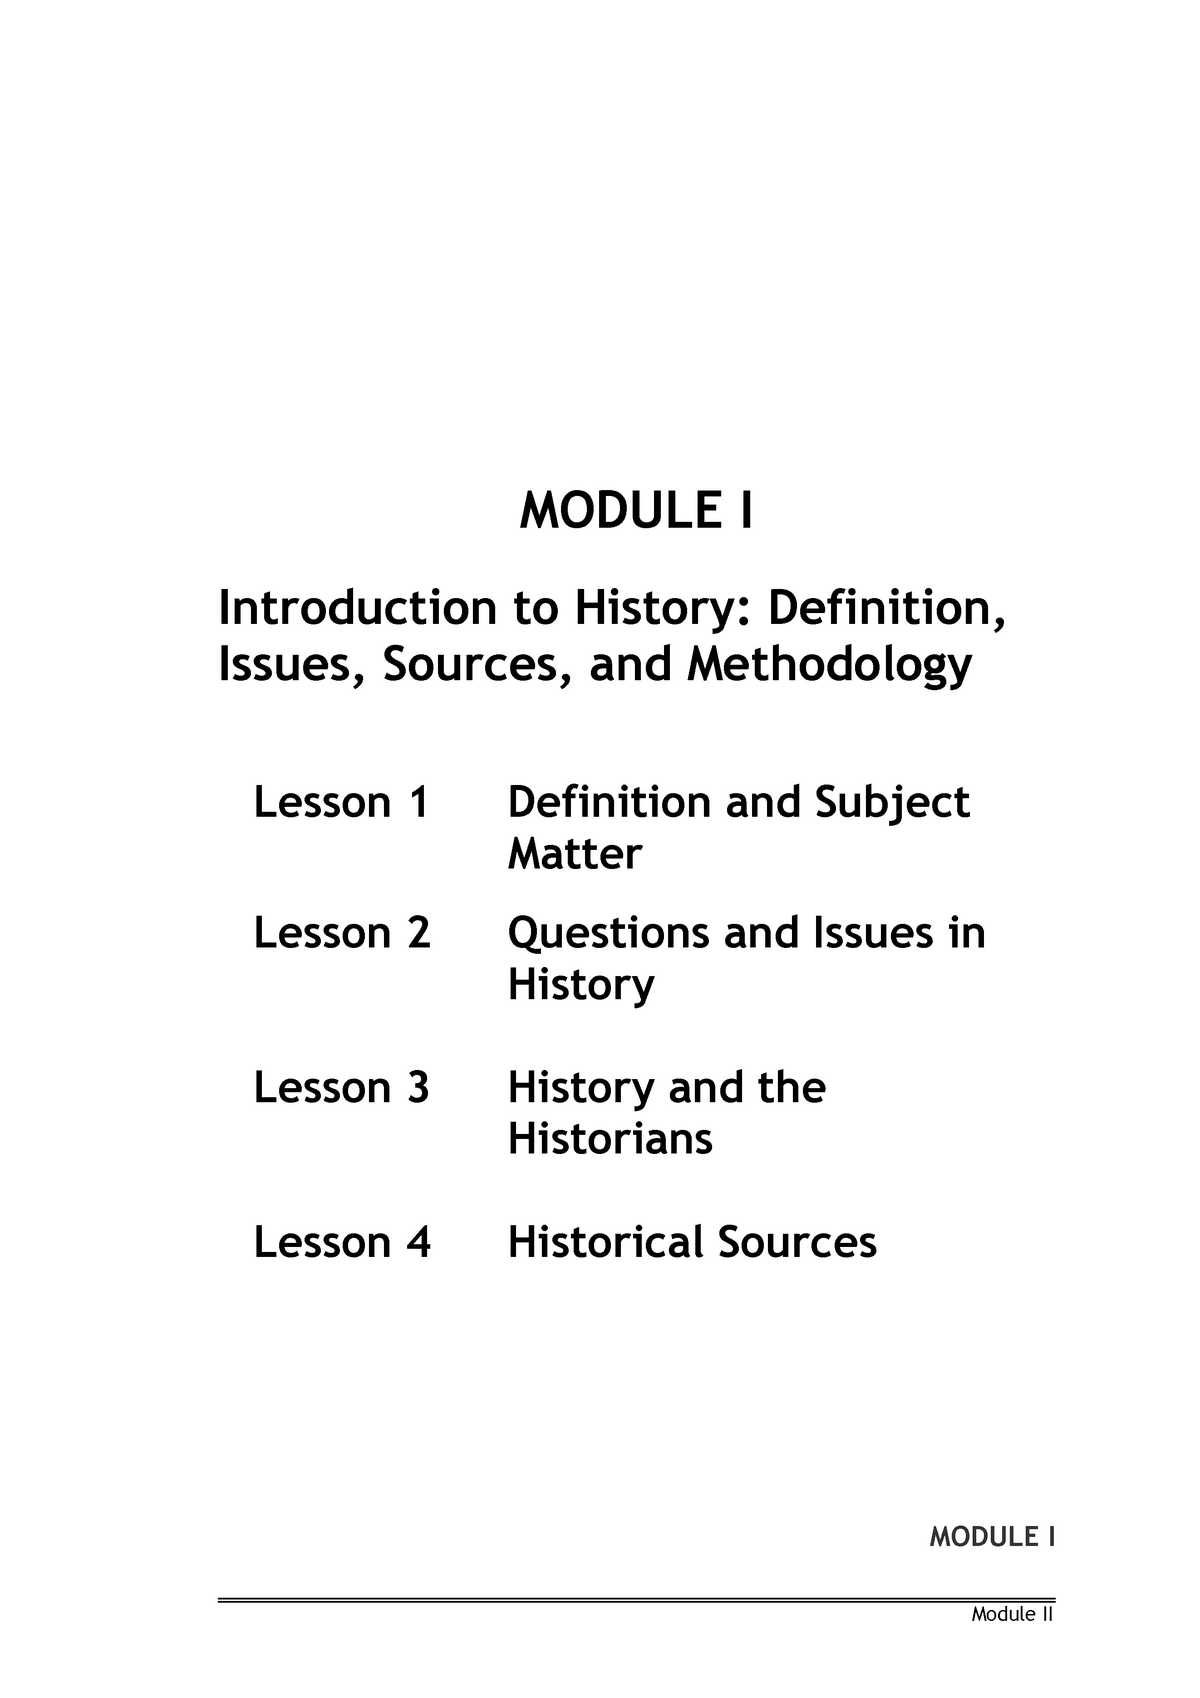 introduction to history definition issues sources and methodology summary slide